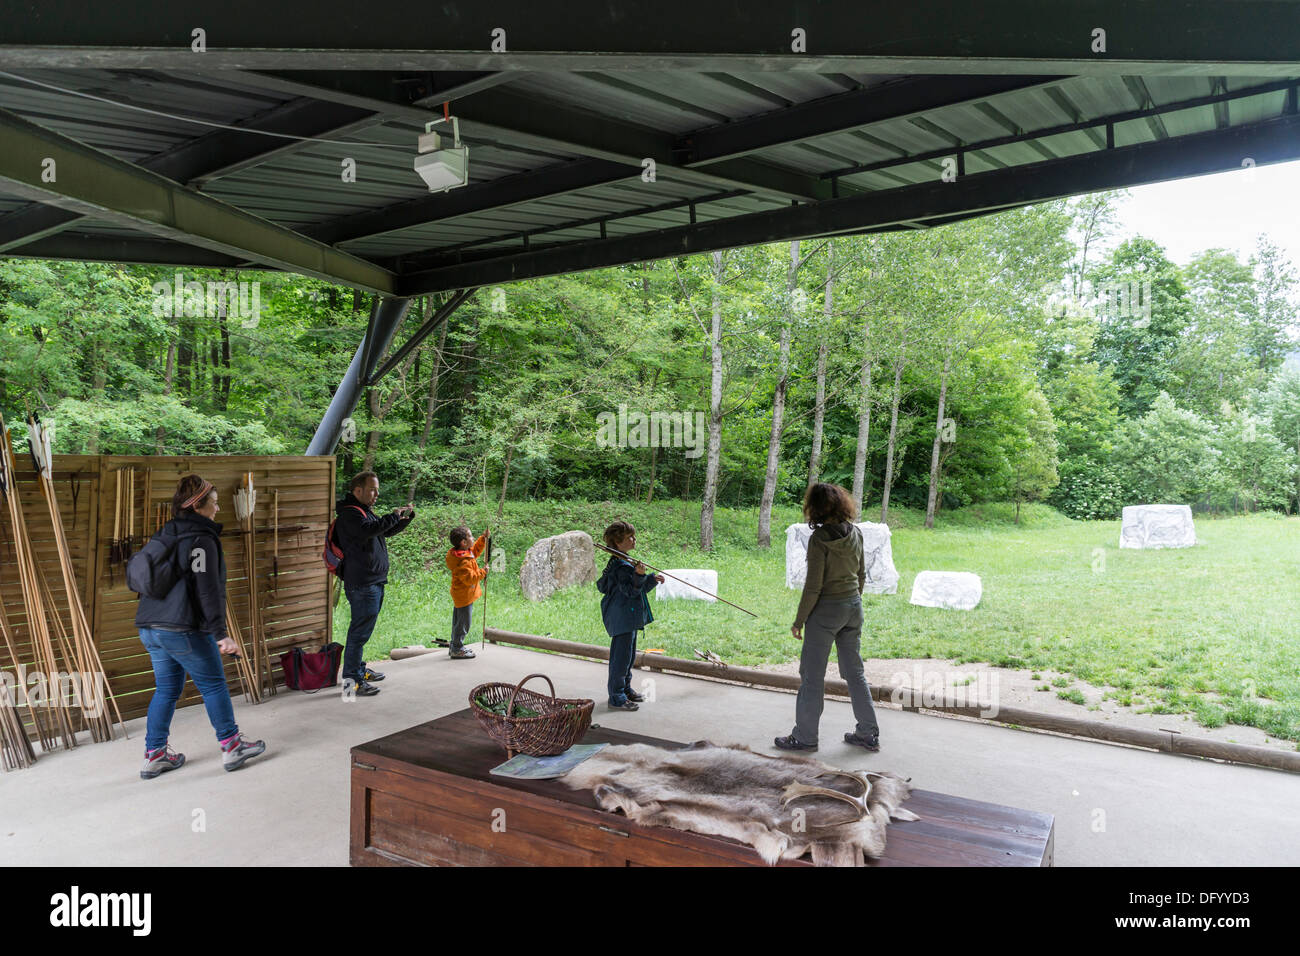 France, Ariege - Parc Prehistorique, Tarascon-sur-Ariege, near Foix. Family with children learn to use spear-thrower. Stock Photo